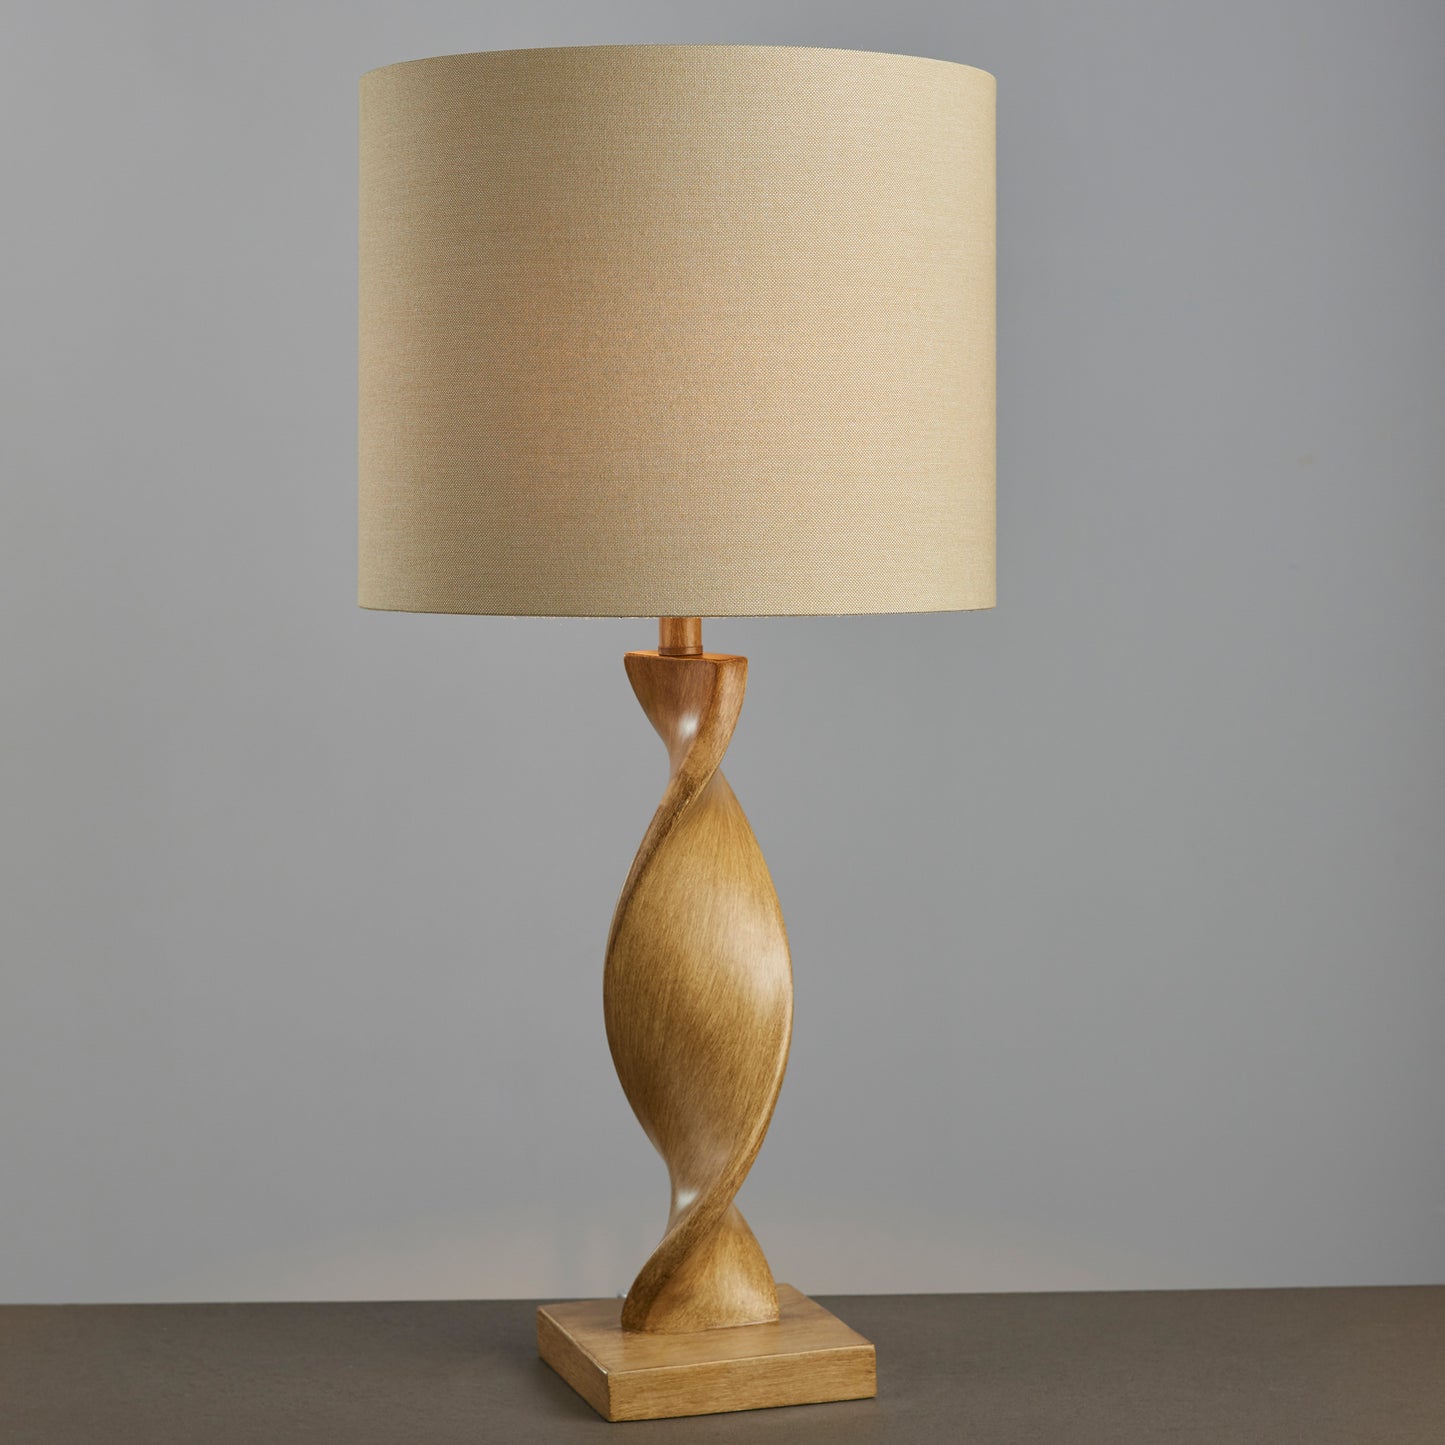 An Ash Table Lamp from Kikiathome.co.uk for interior decor.